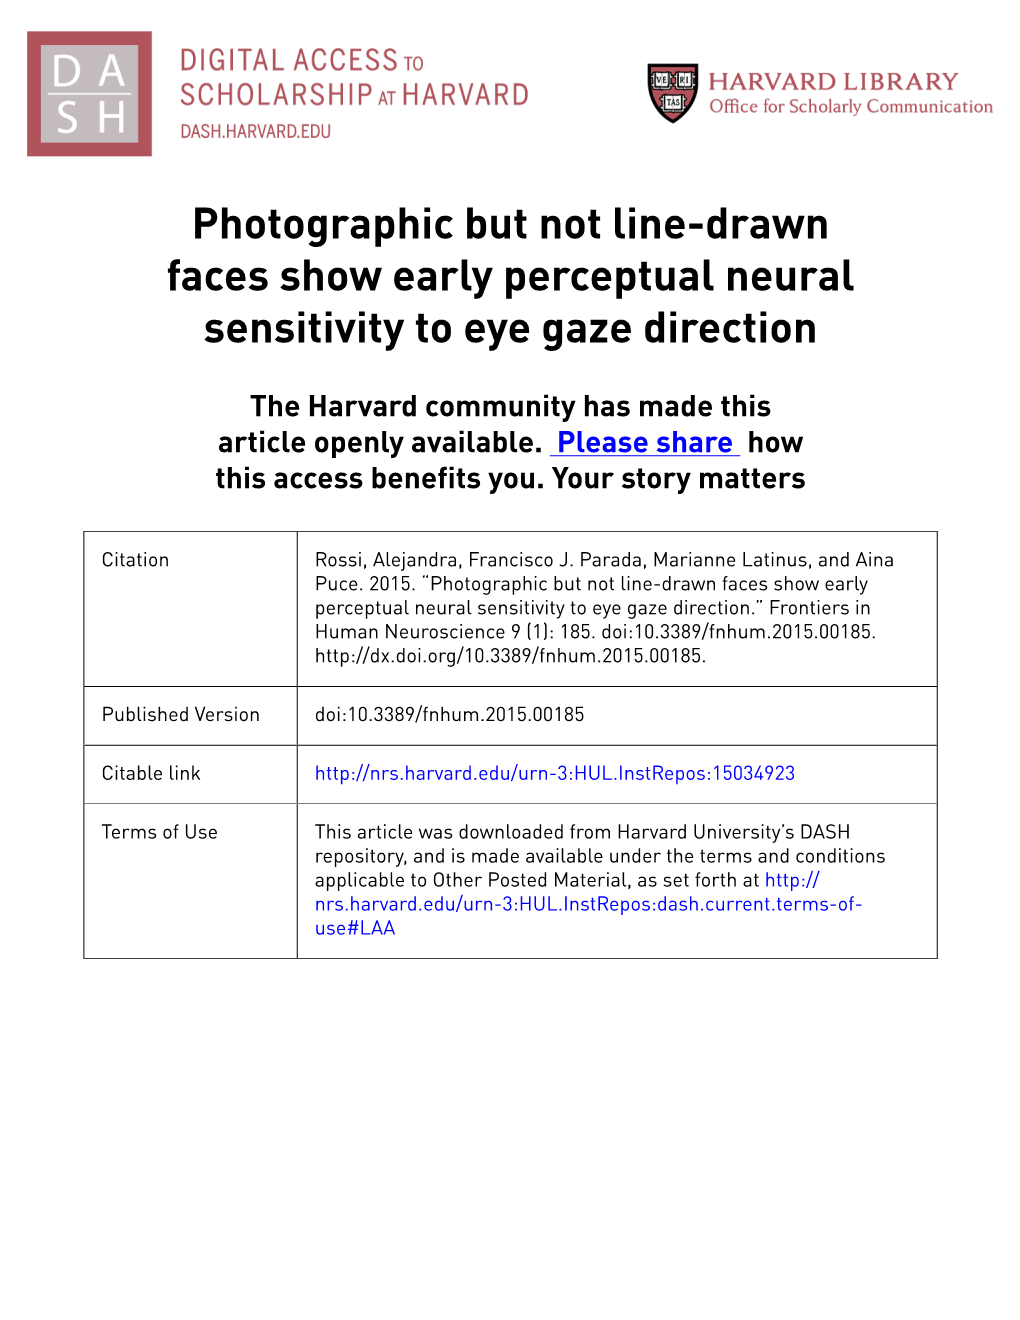 Photographic but Not Line-Drawn Faces Show Early Perceptual Neural Sensitivity to Eye Gaze Direction